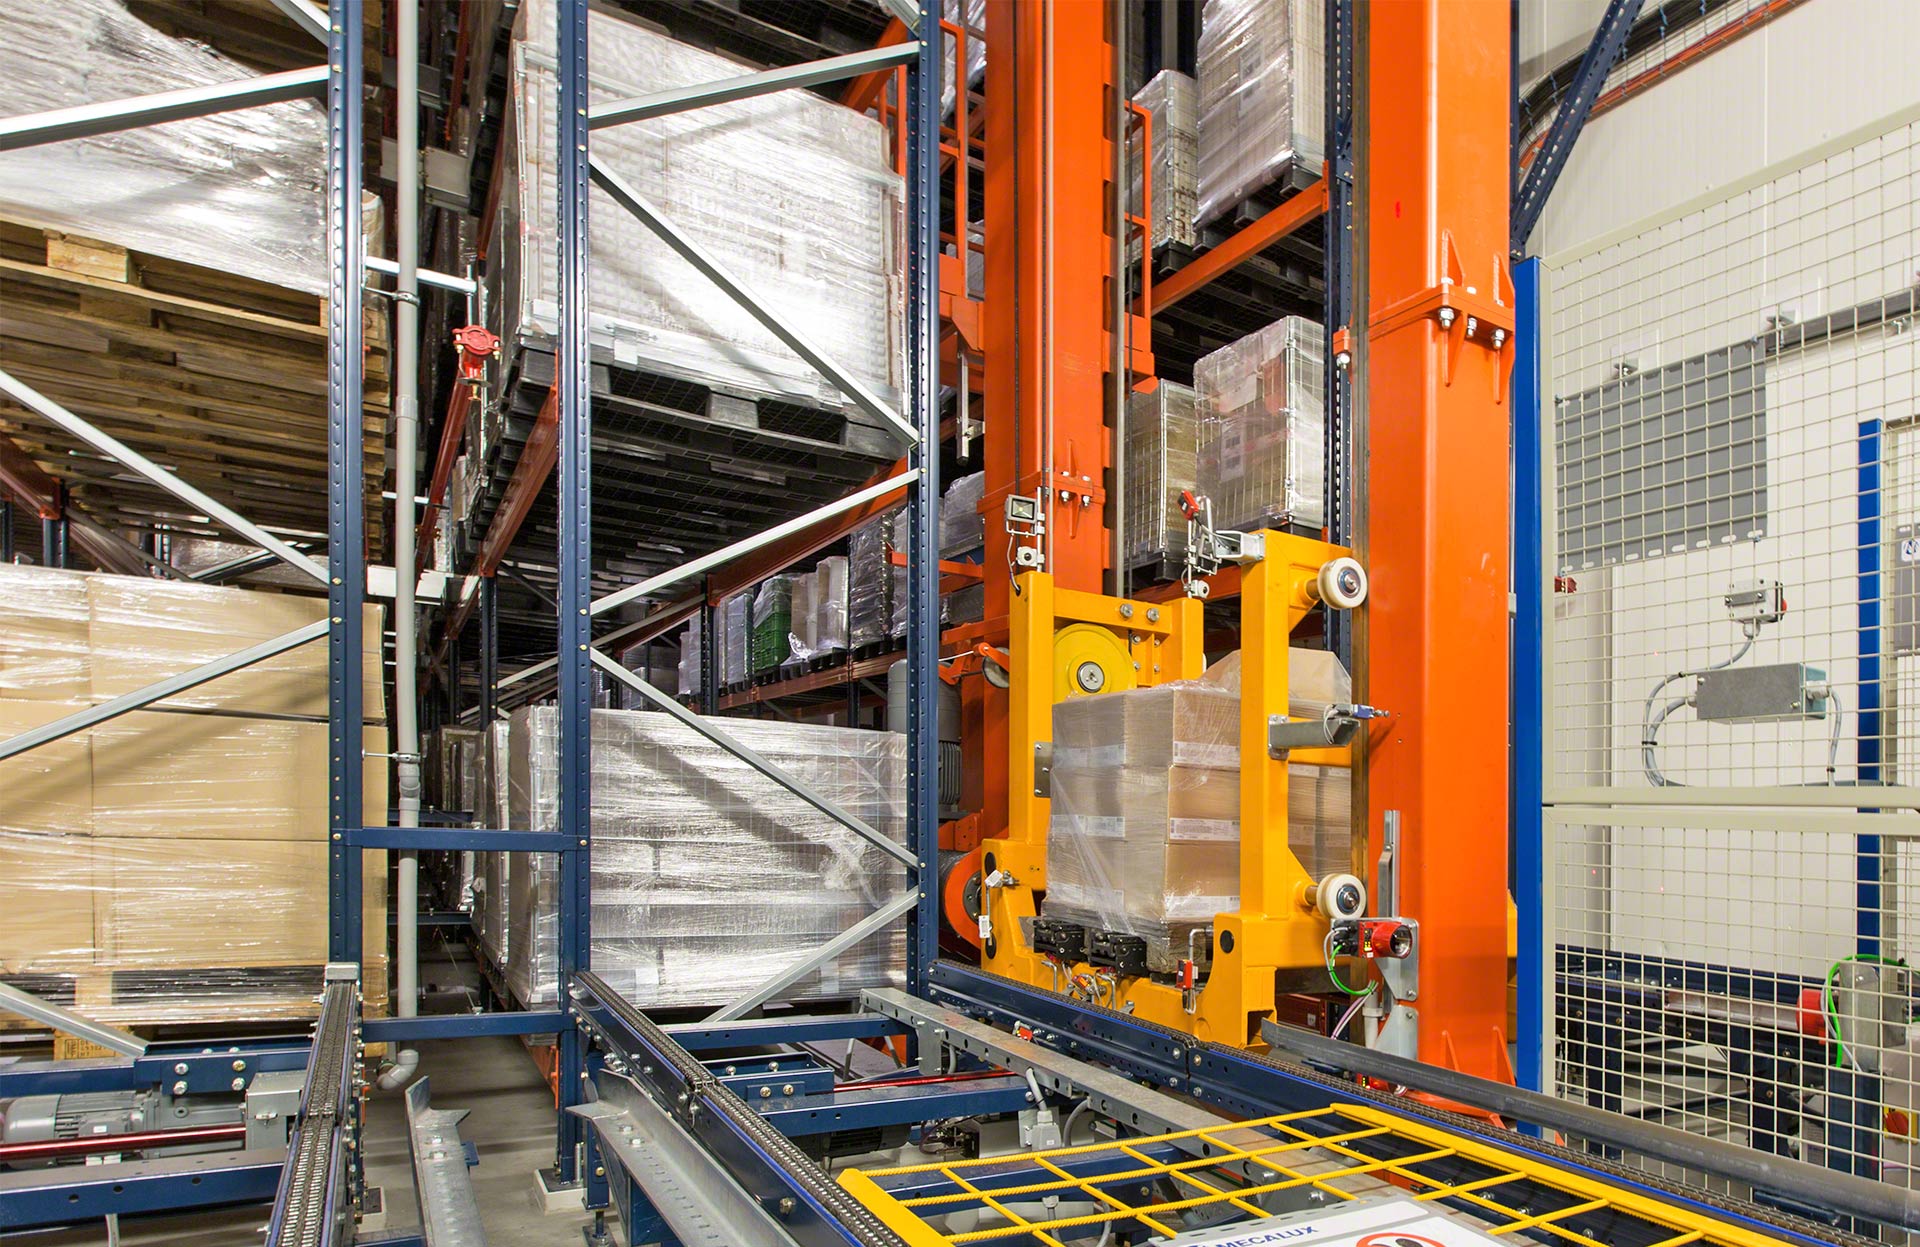 Pallets are transported supported on the lifting cradle, which also includes the extraction system